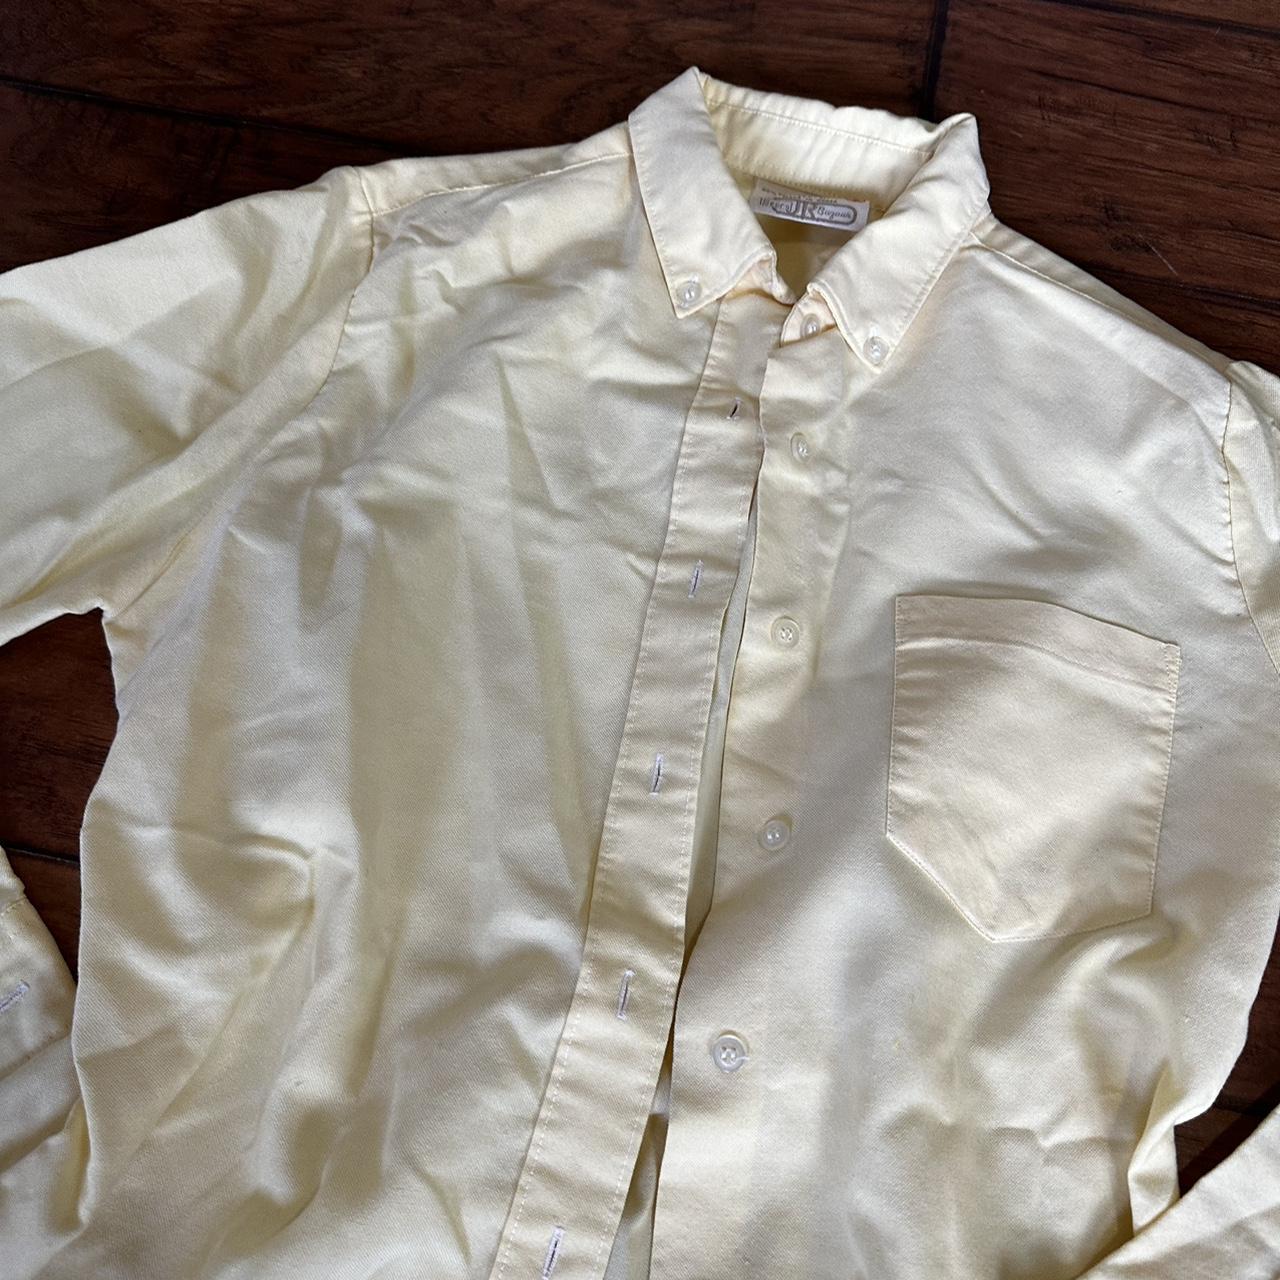 Sears Women's Yellow and Cream Blouse (3)